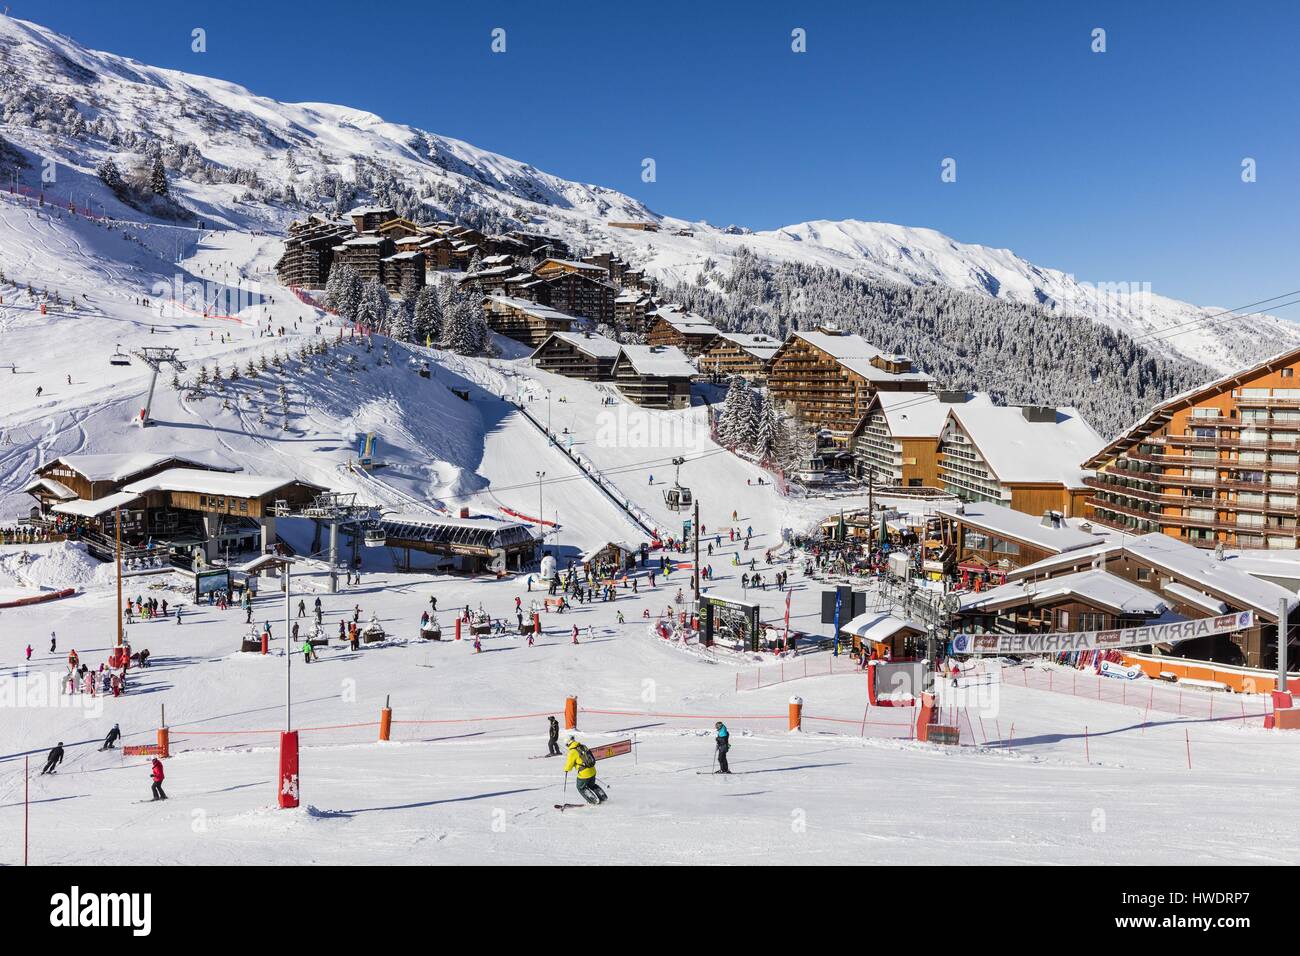 France, Savoie, Tarentaise valley, Meribel Mottaret is one of the largest skiresort village in France, in the heart of Les Trois Vallees (The Three Valleys), one of the biggest ski areas in the world with 600km of marked trails, western part of the Vanoise Massif Stock Photo